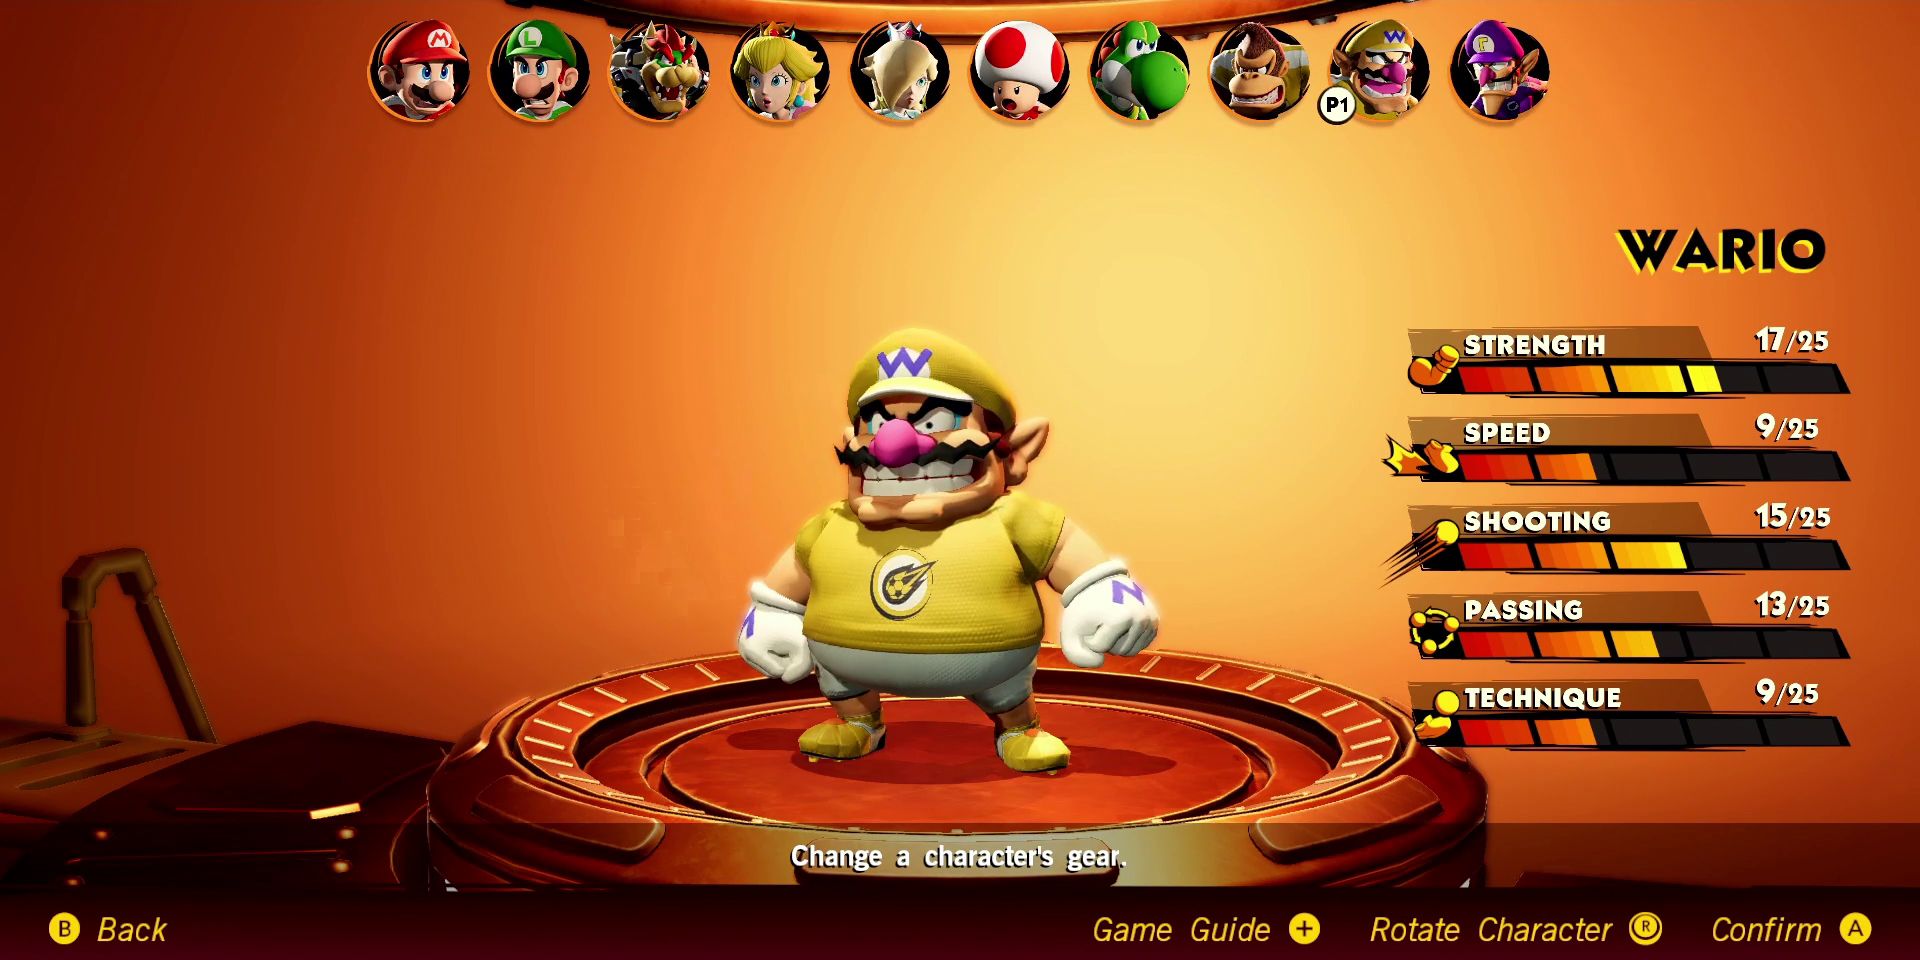 Why Wario Carries the Ball in Mario Strikers Battle League